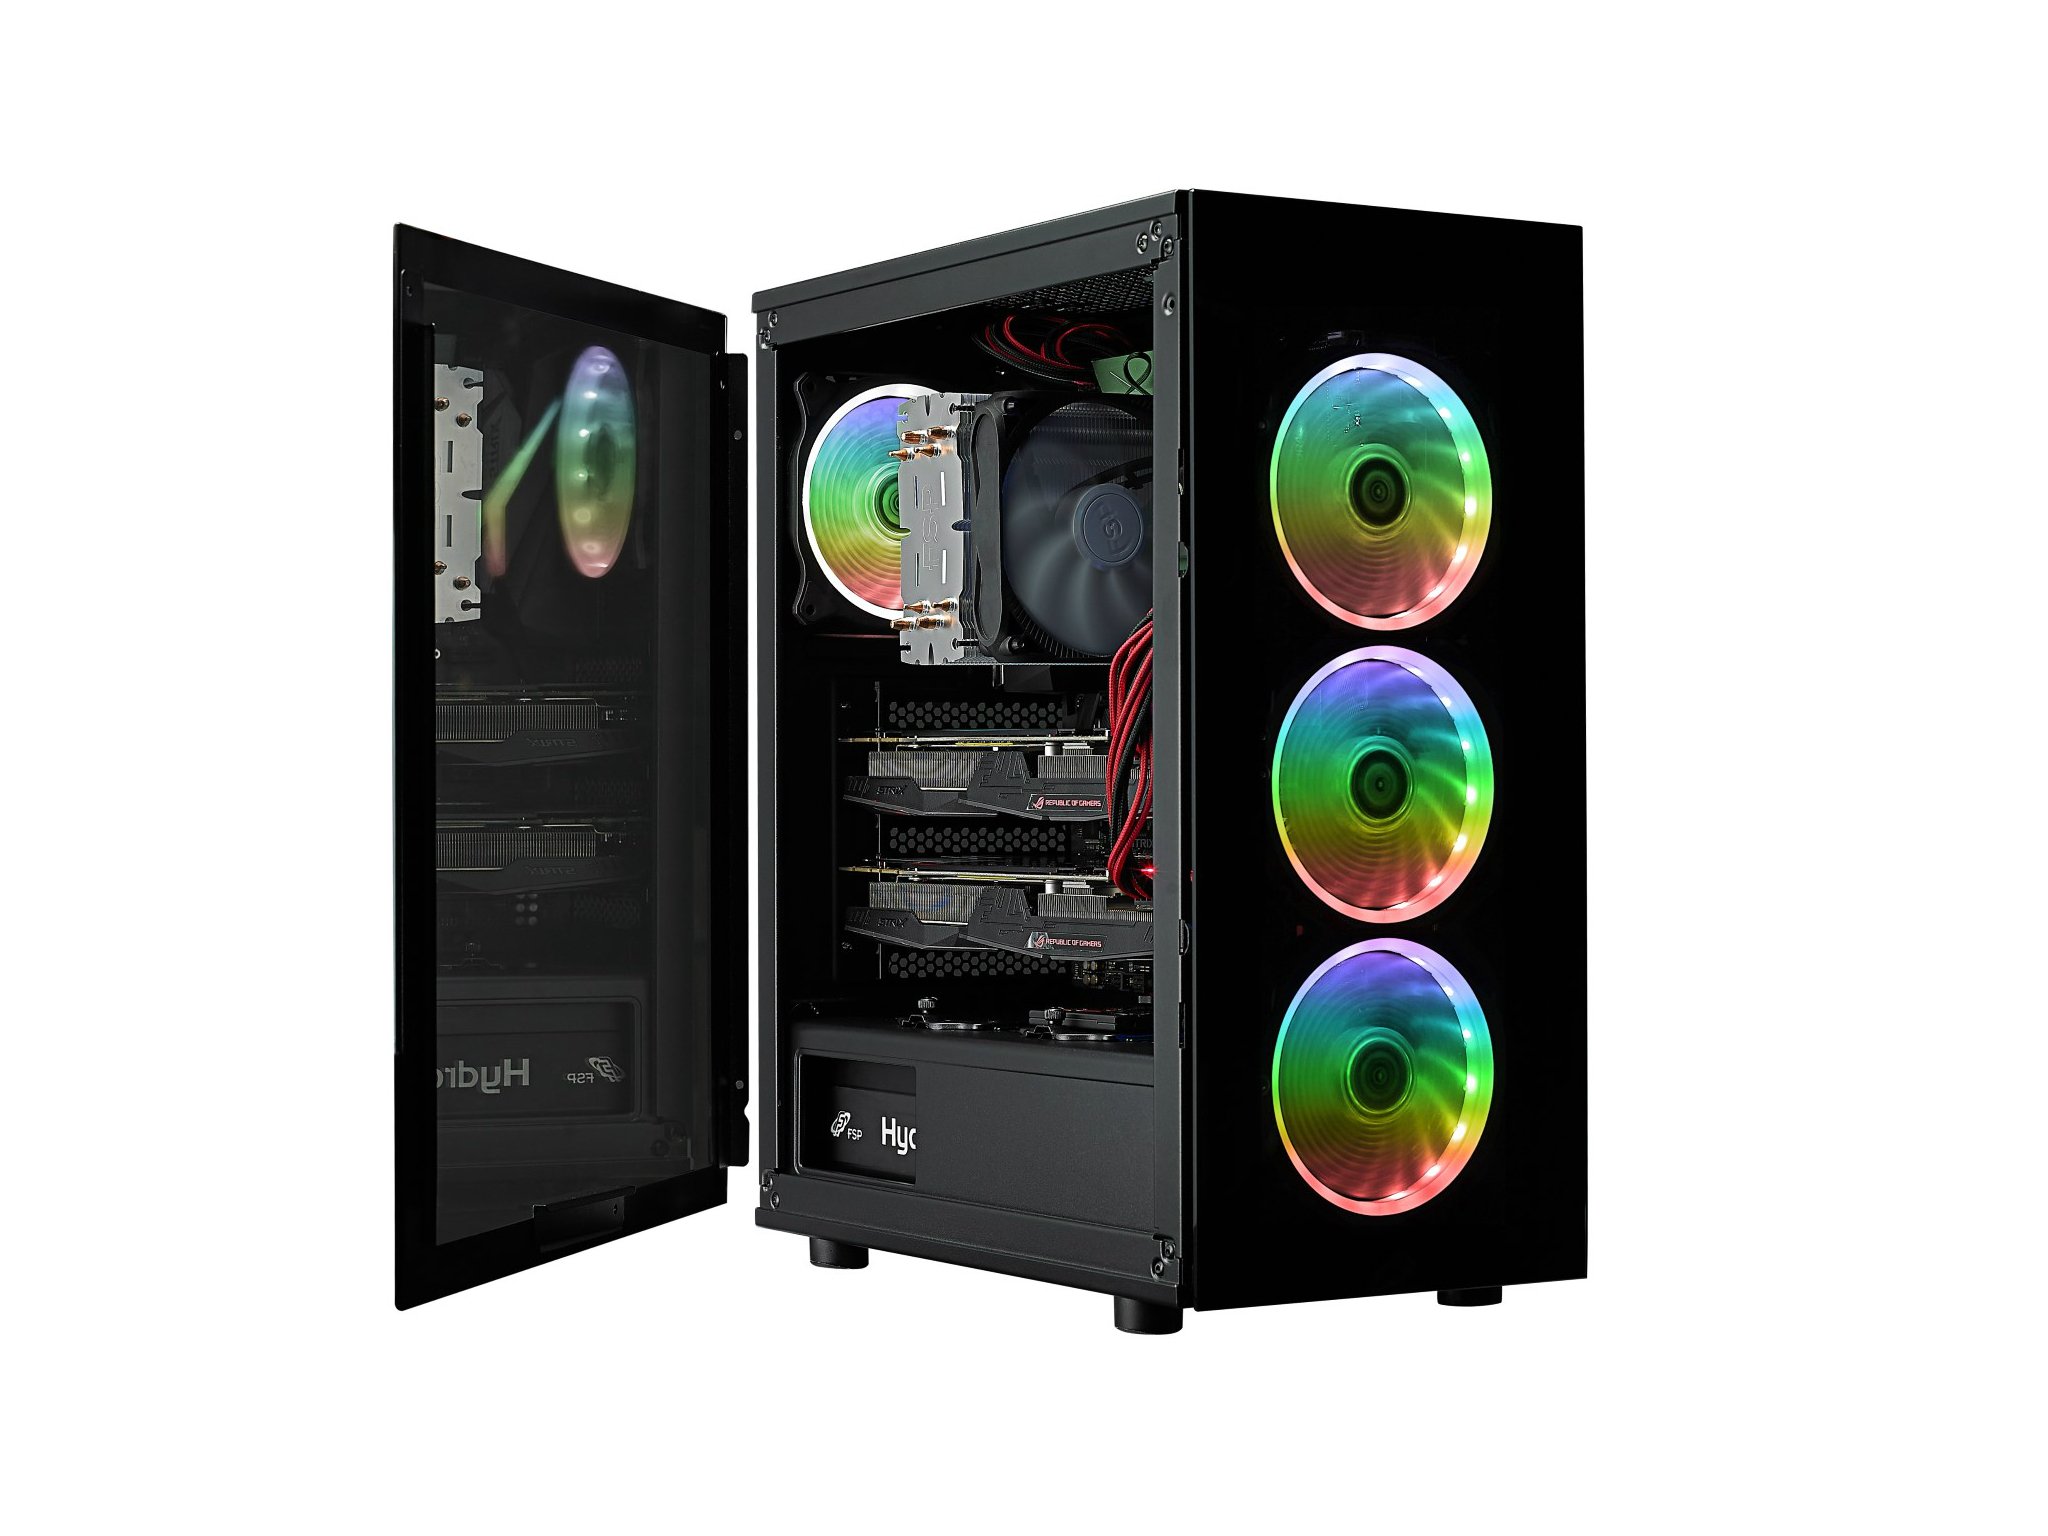 Pc cases with rgb fans casehardware ru